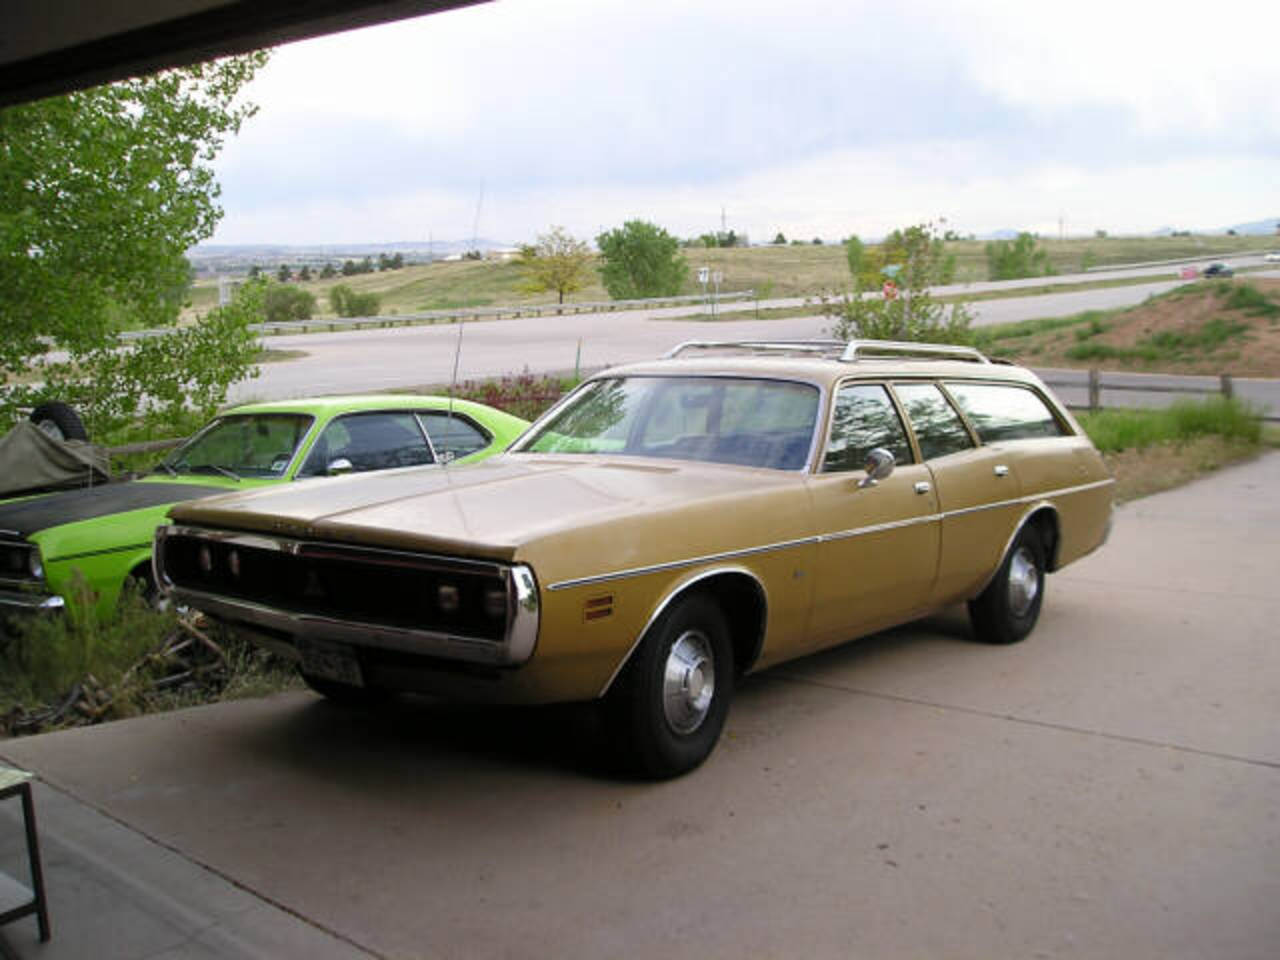 This 1971 Dodge Coronet Custom 6-Passenger Station Wagon would make a great